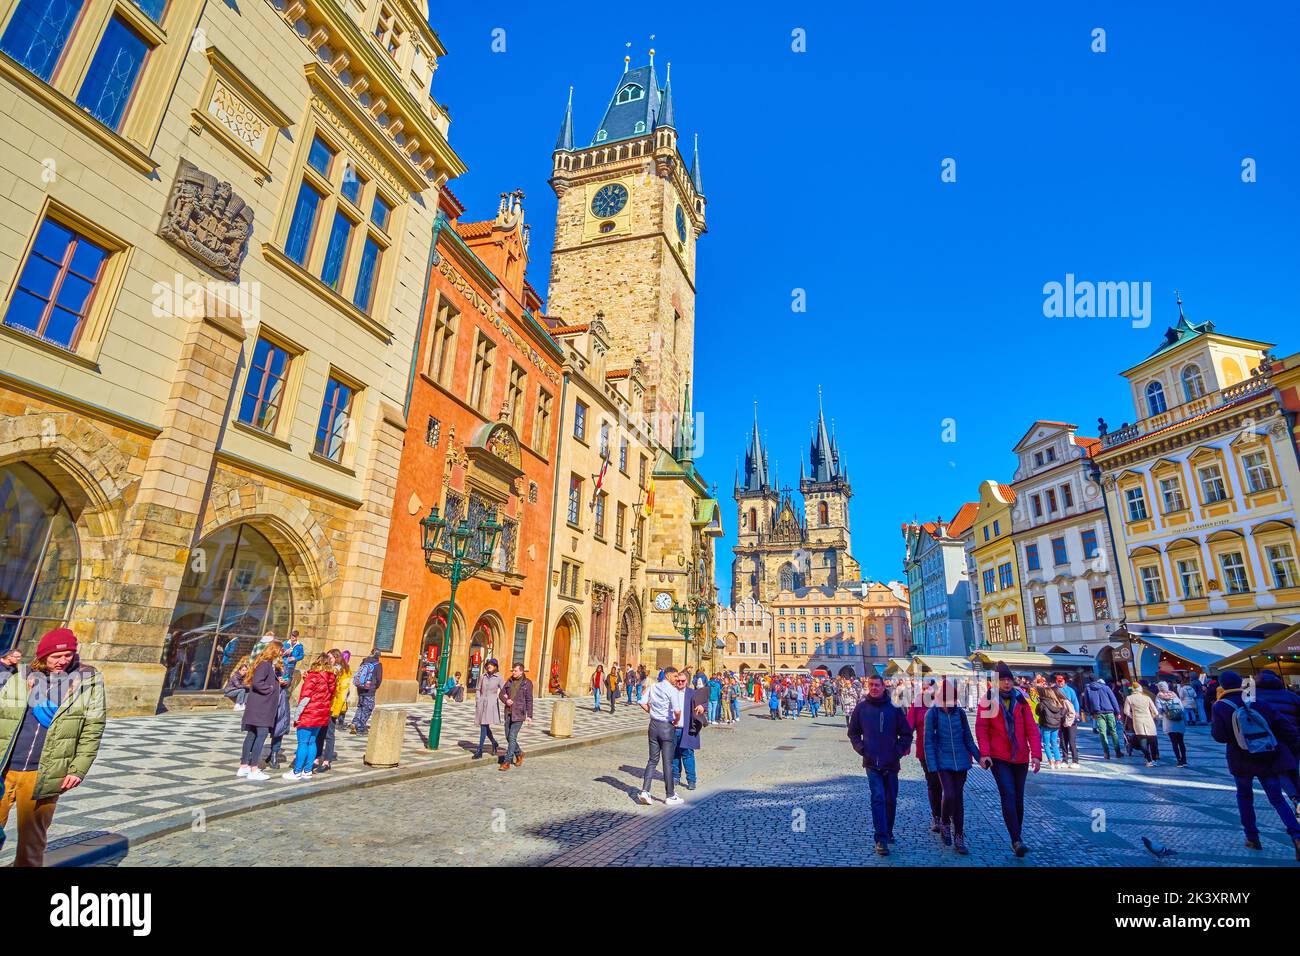 PRAGUE, CZECH REPUBLIC - MARCH 12, 2022: Staromestske namesti (Old Town Square) with Olt Town Hall and its Tower with Astronomical Clock, on March 12 Stock Photo